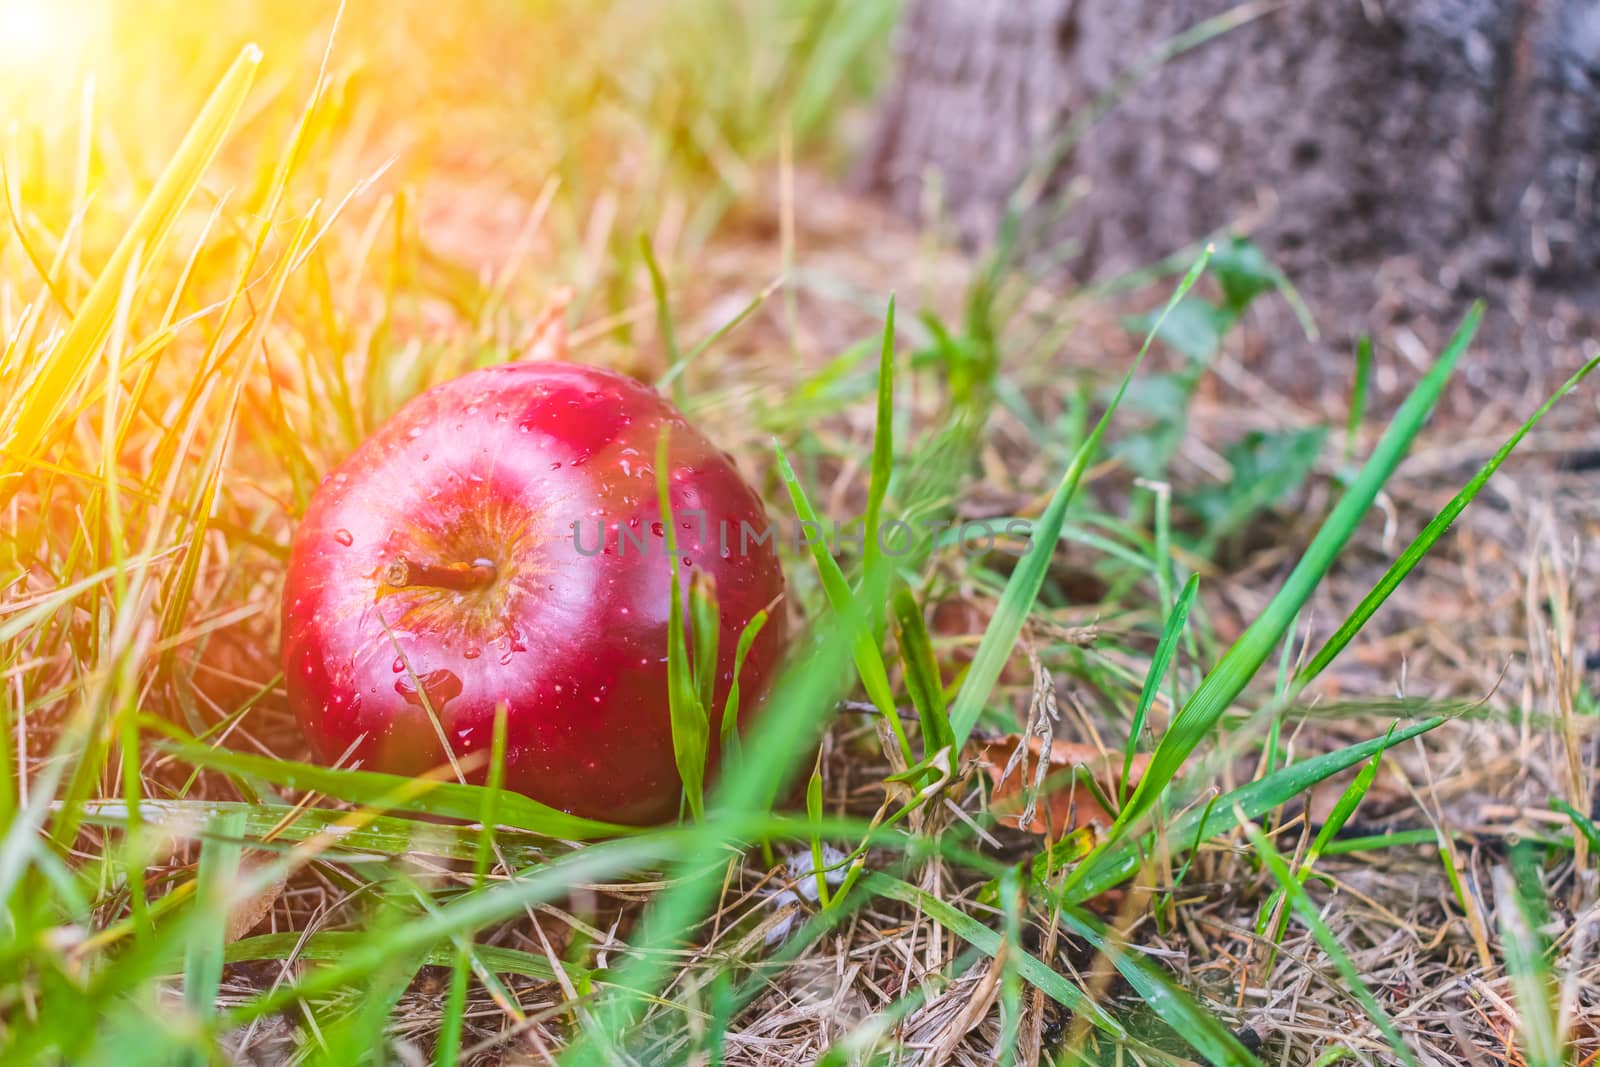 A red and juicy apple that has fallen from a tree lies in the grass in the sun